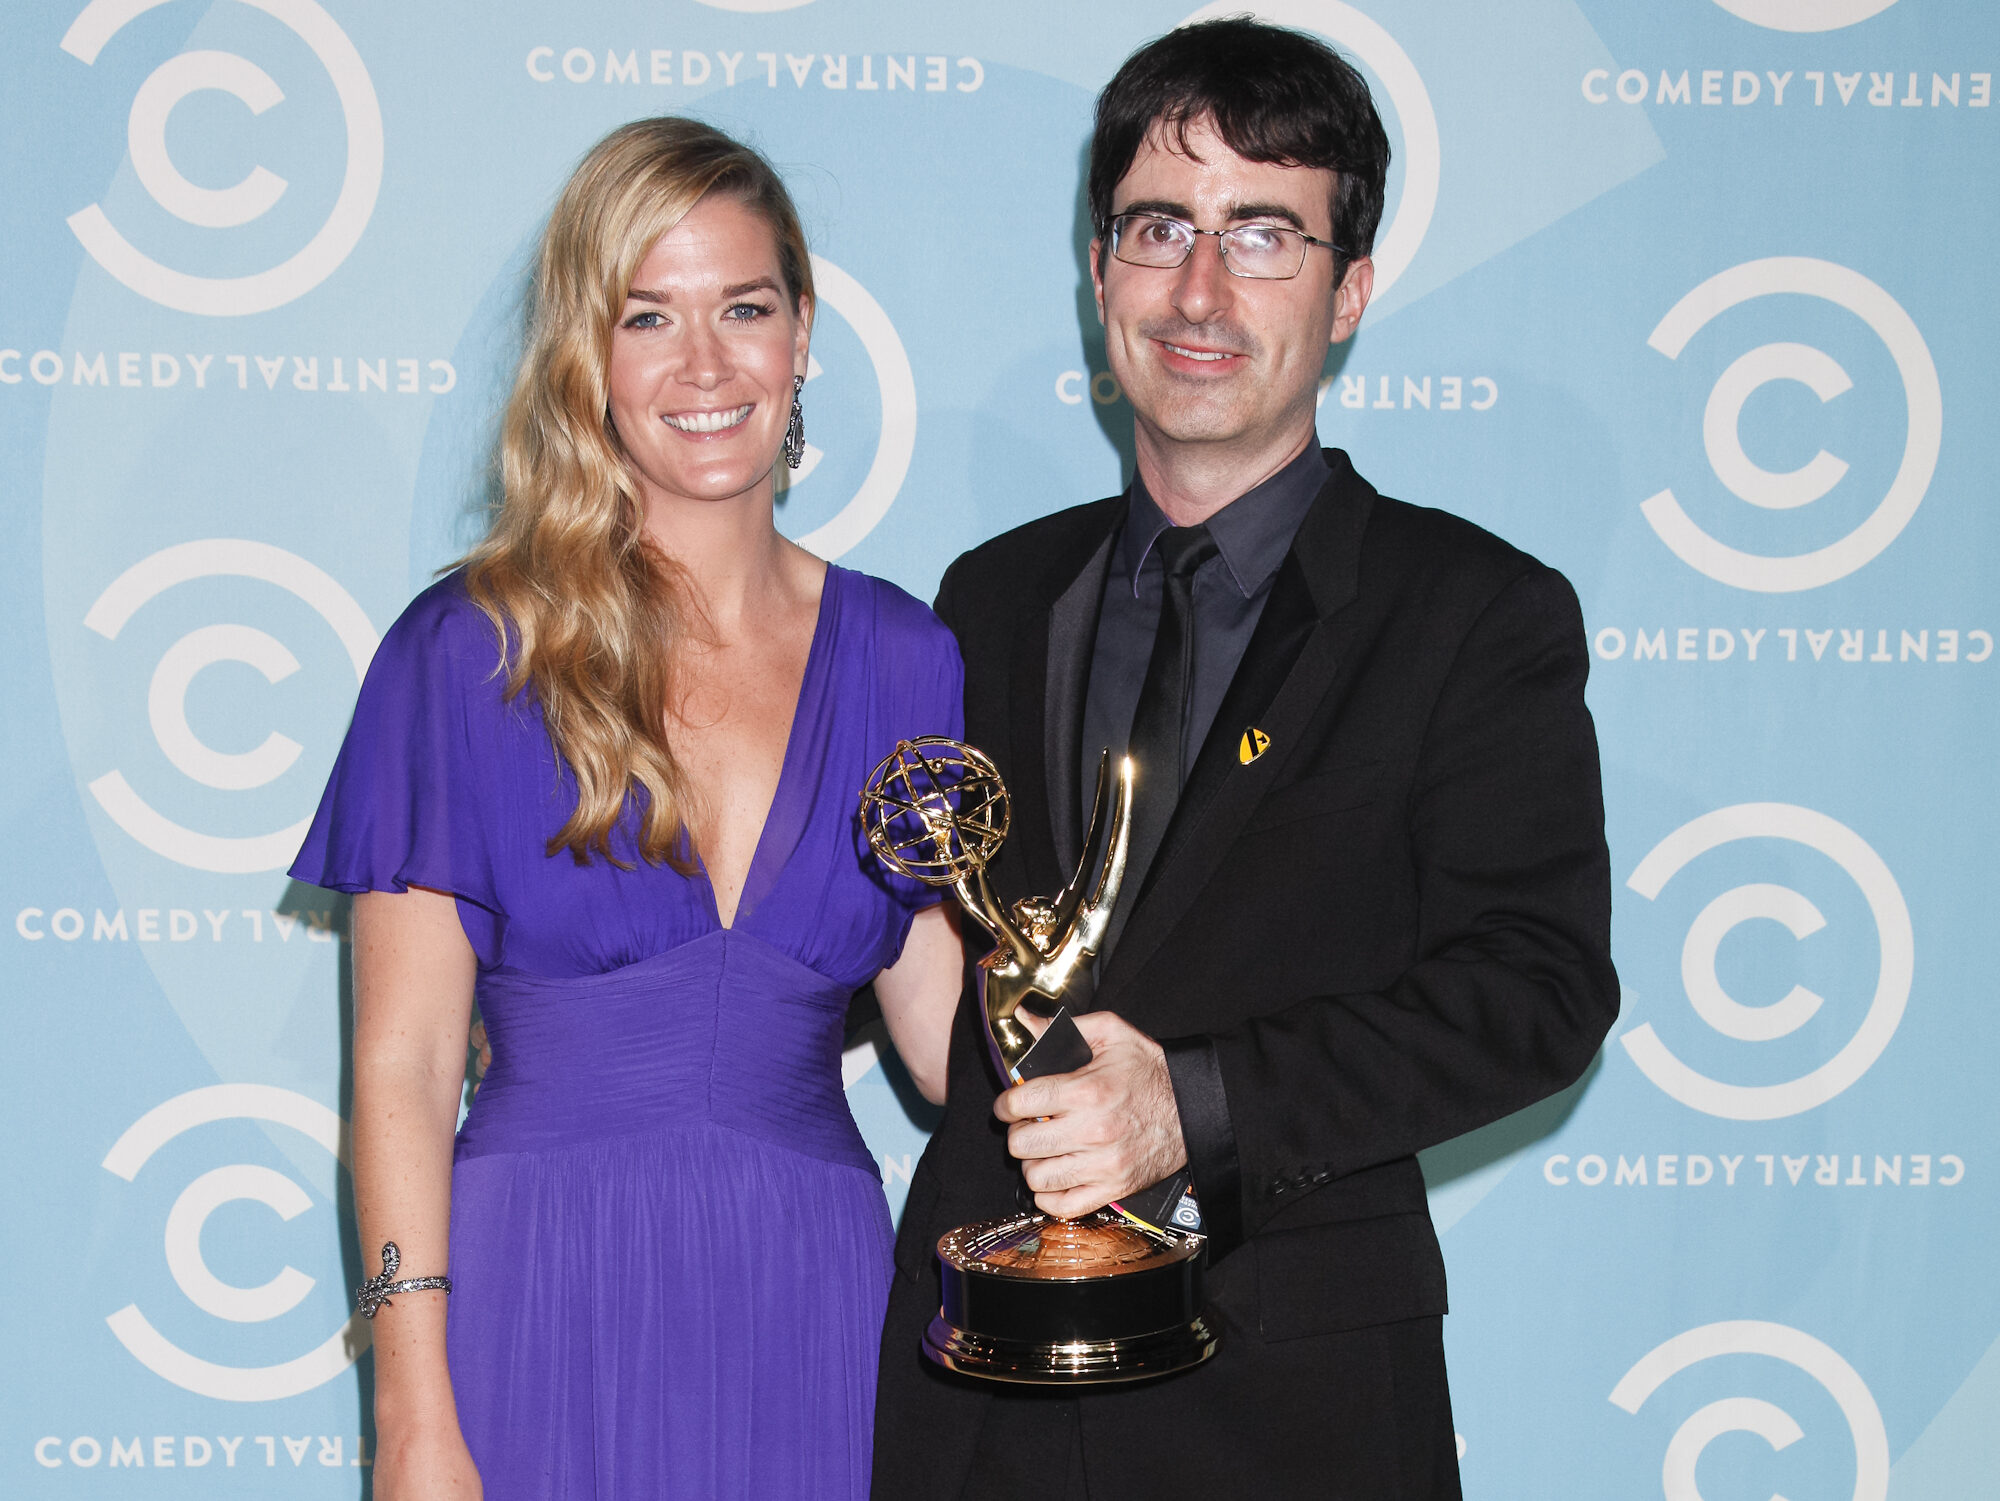 Kate Norley (L) in purple dress standing next to John Oliver